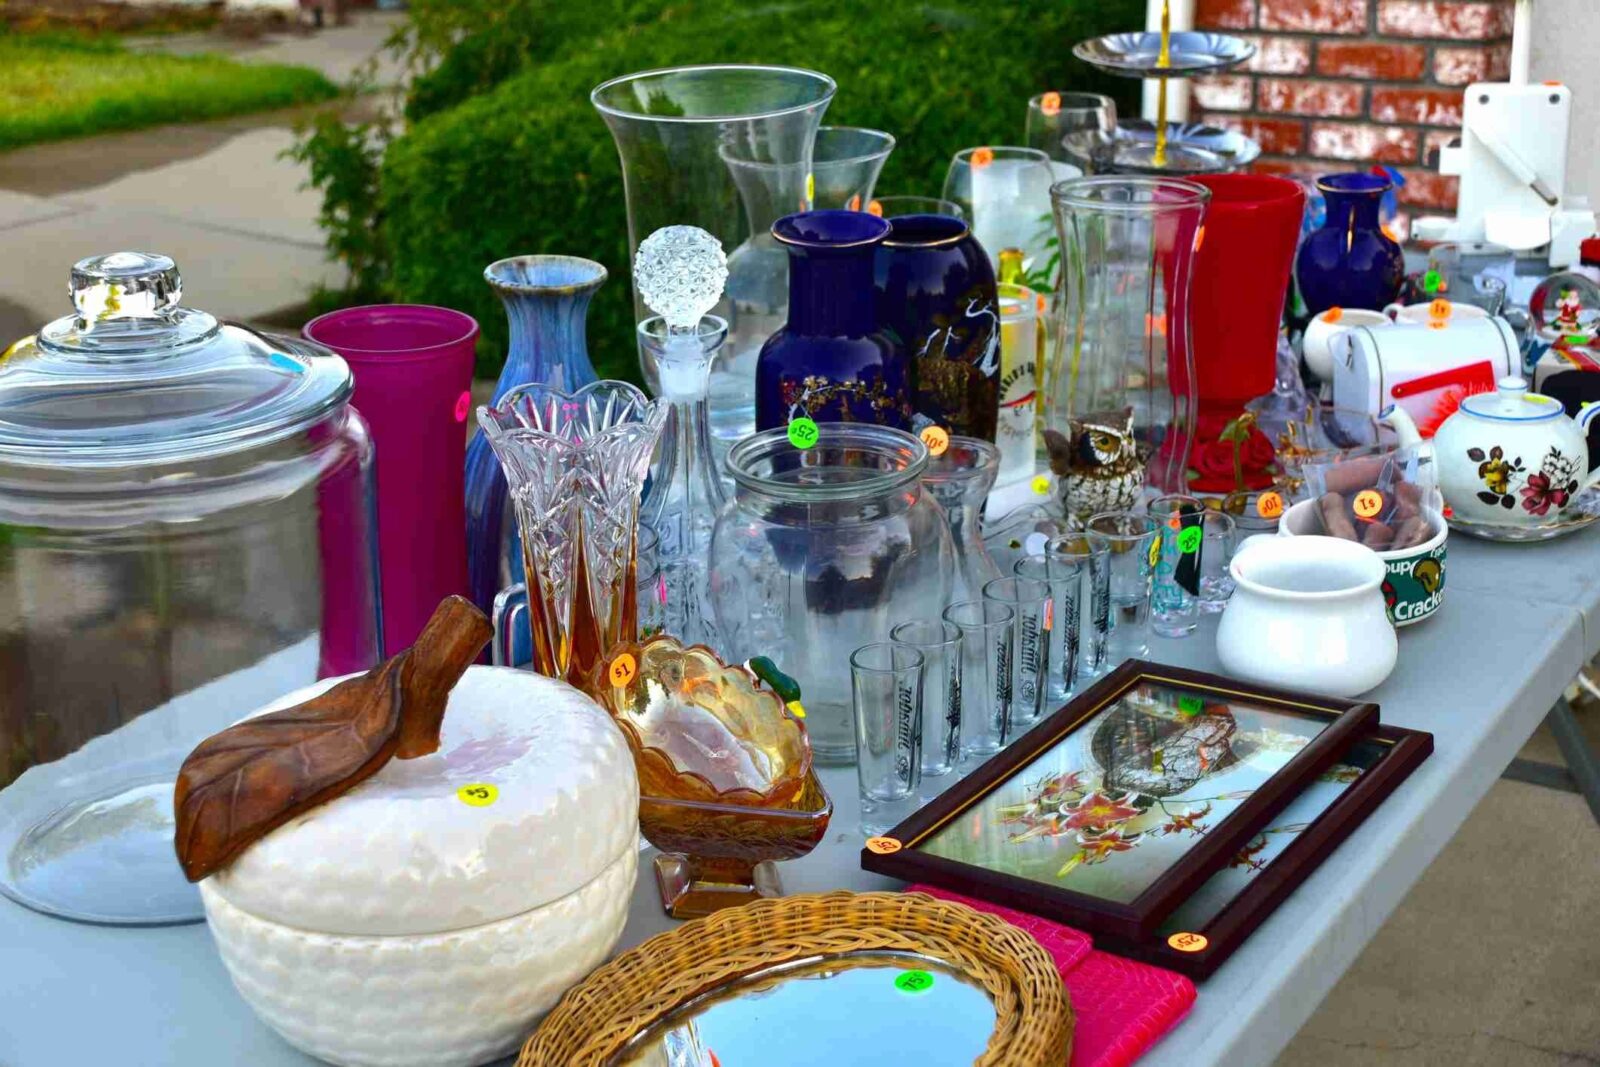 selection of items for sale at a garage sale includes glassware, picture frames